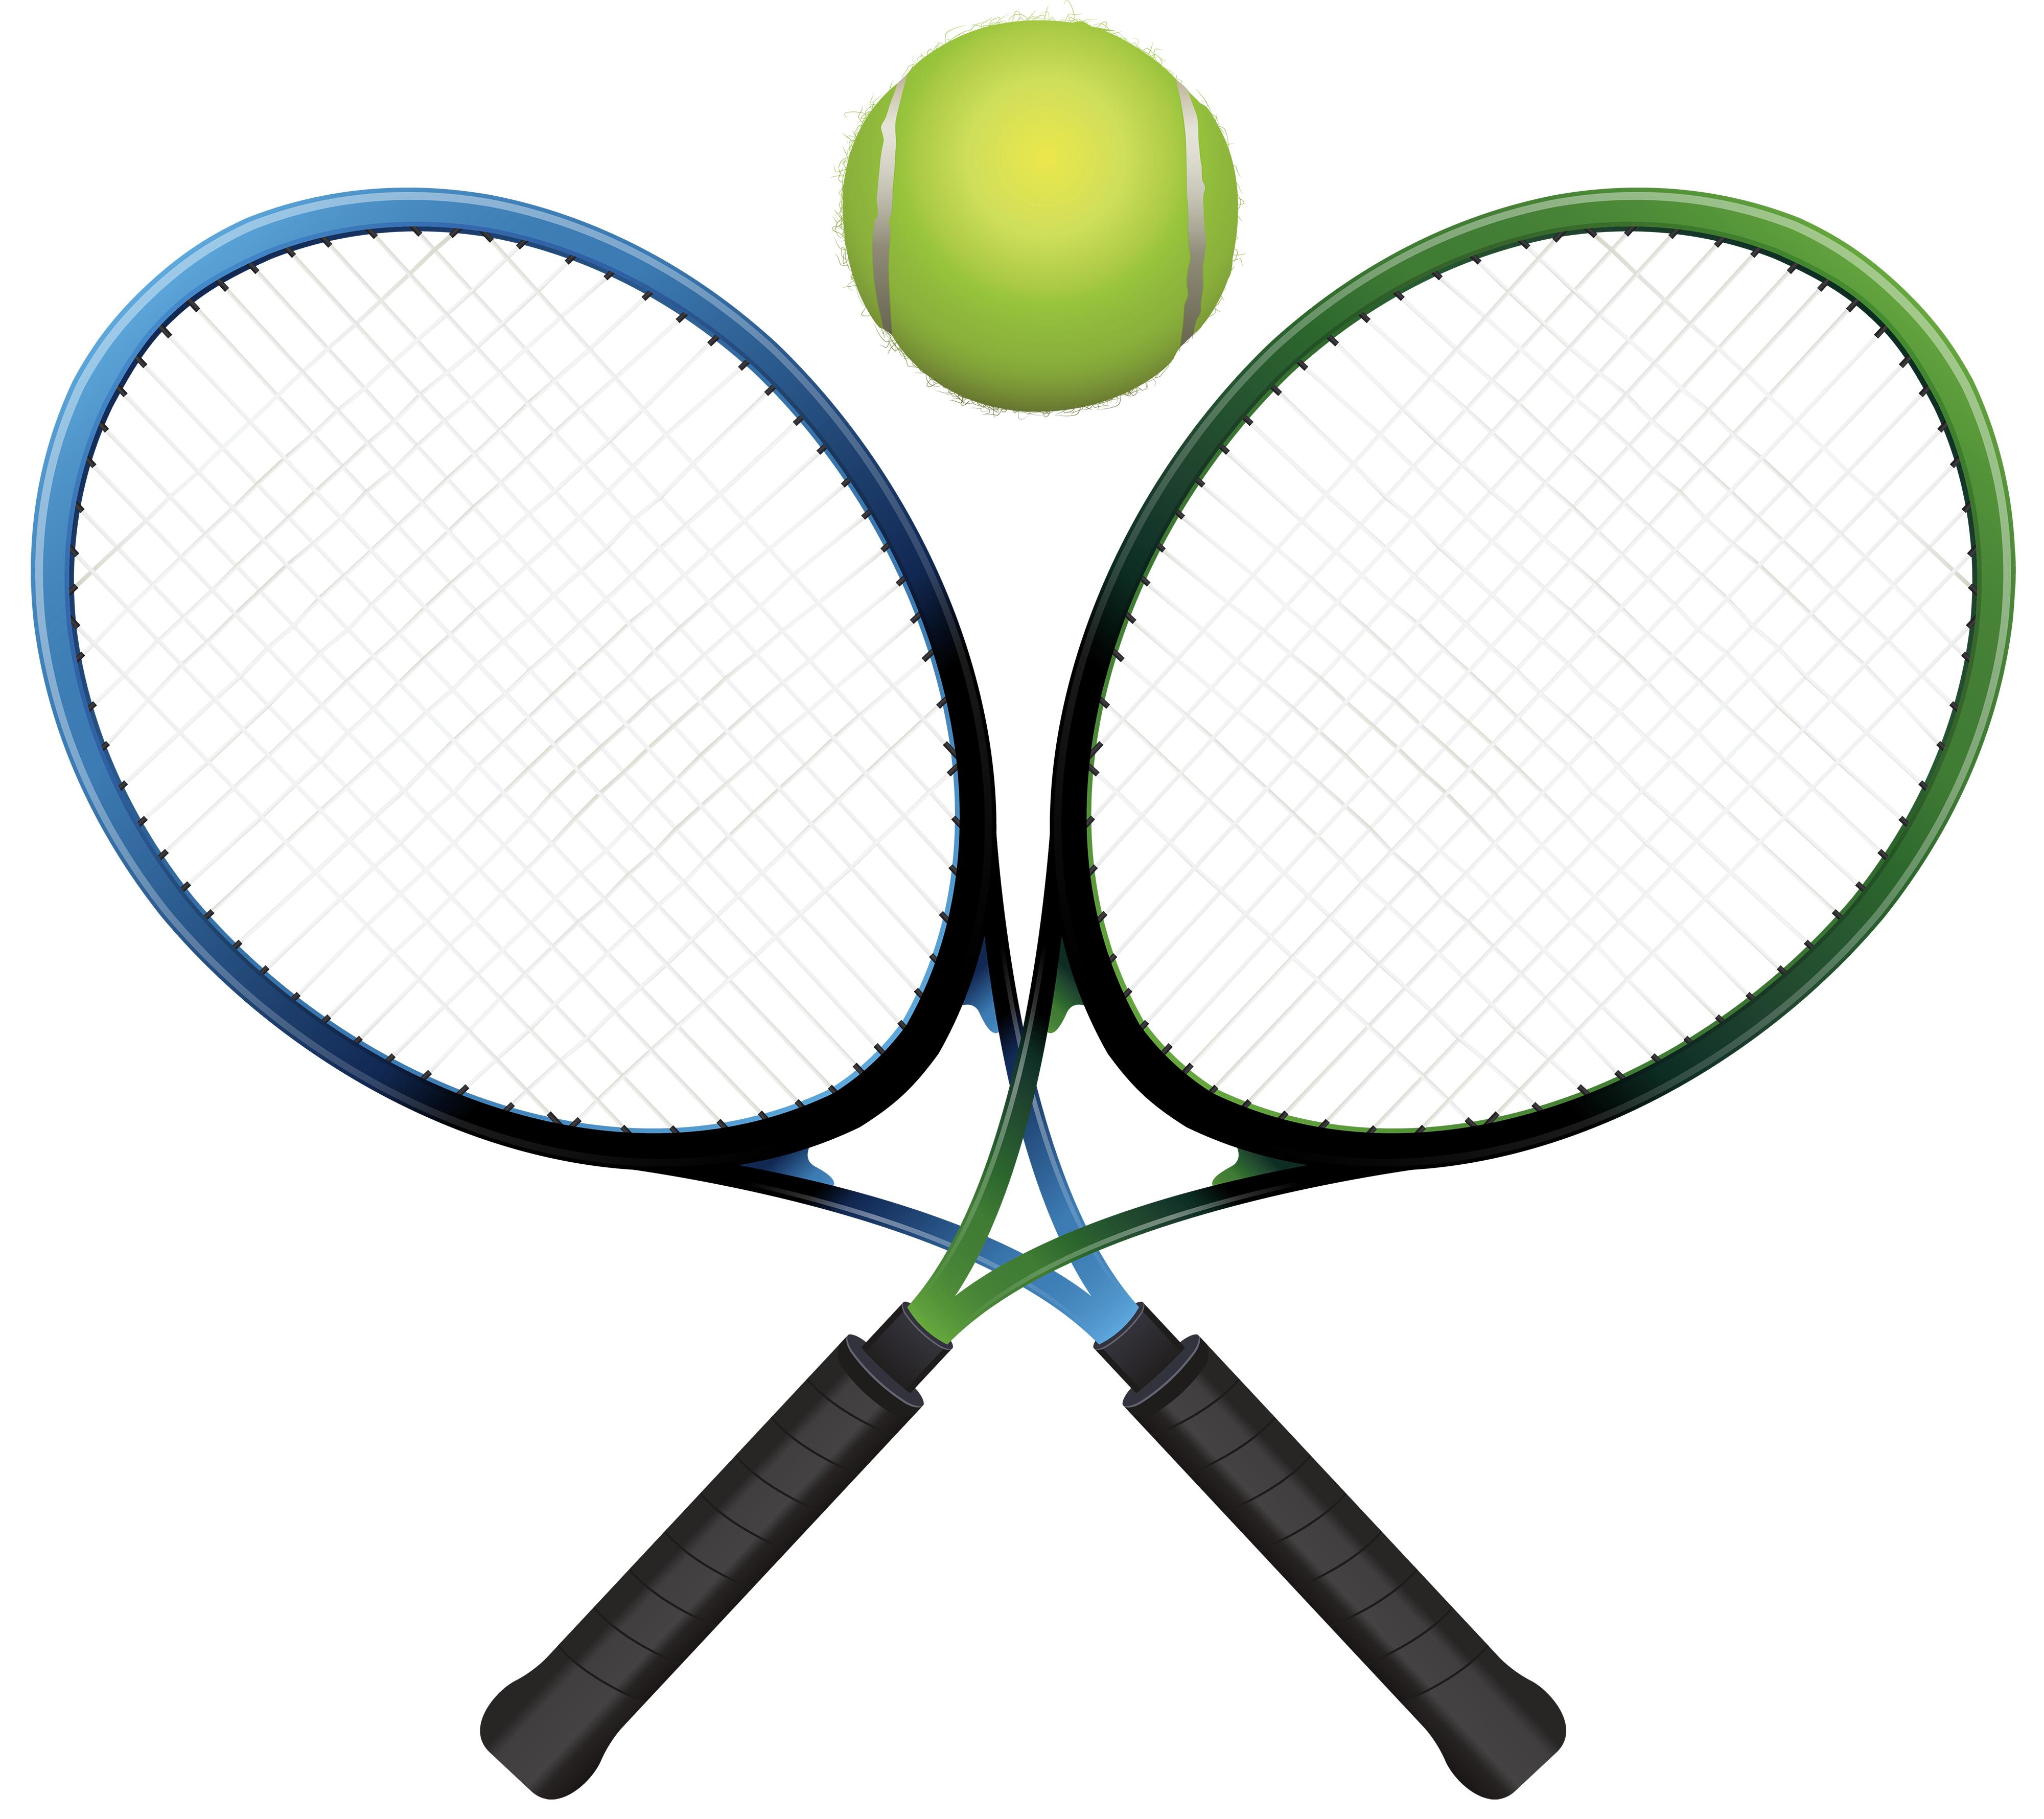 Tennis Racket Cliparts - Cliparts and Others Art Inspiration